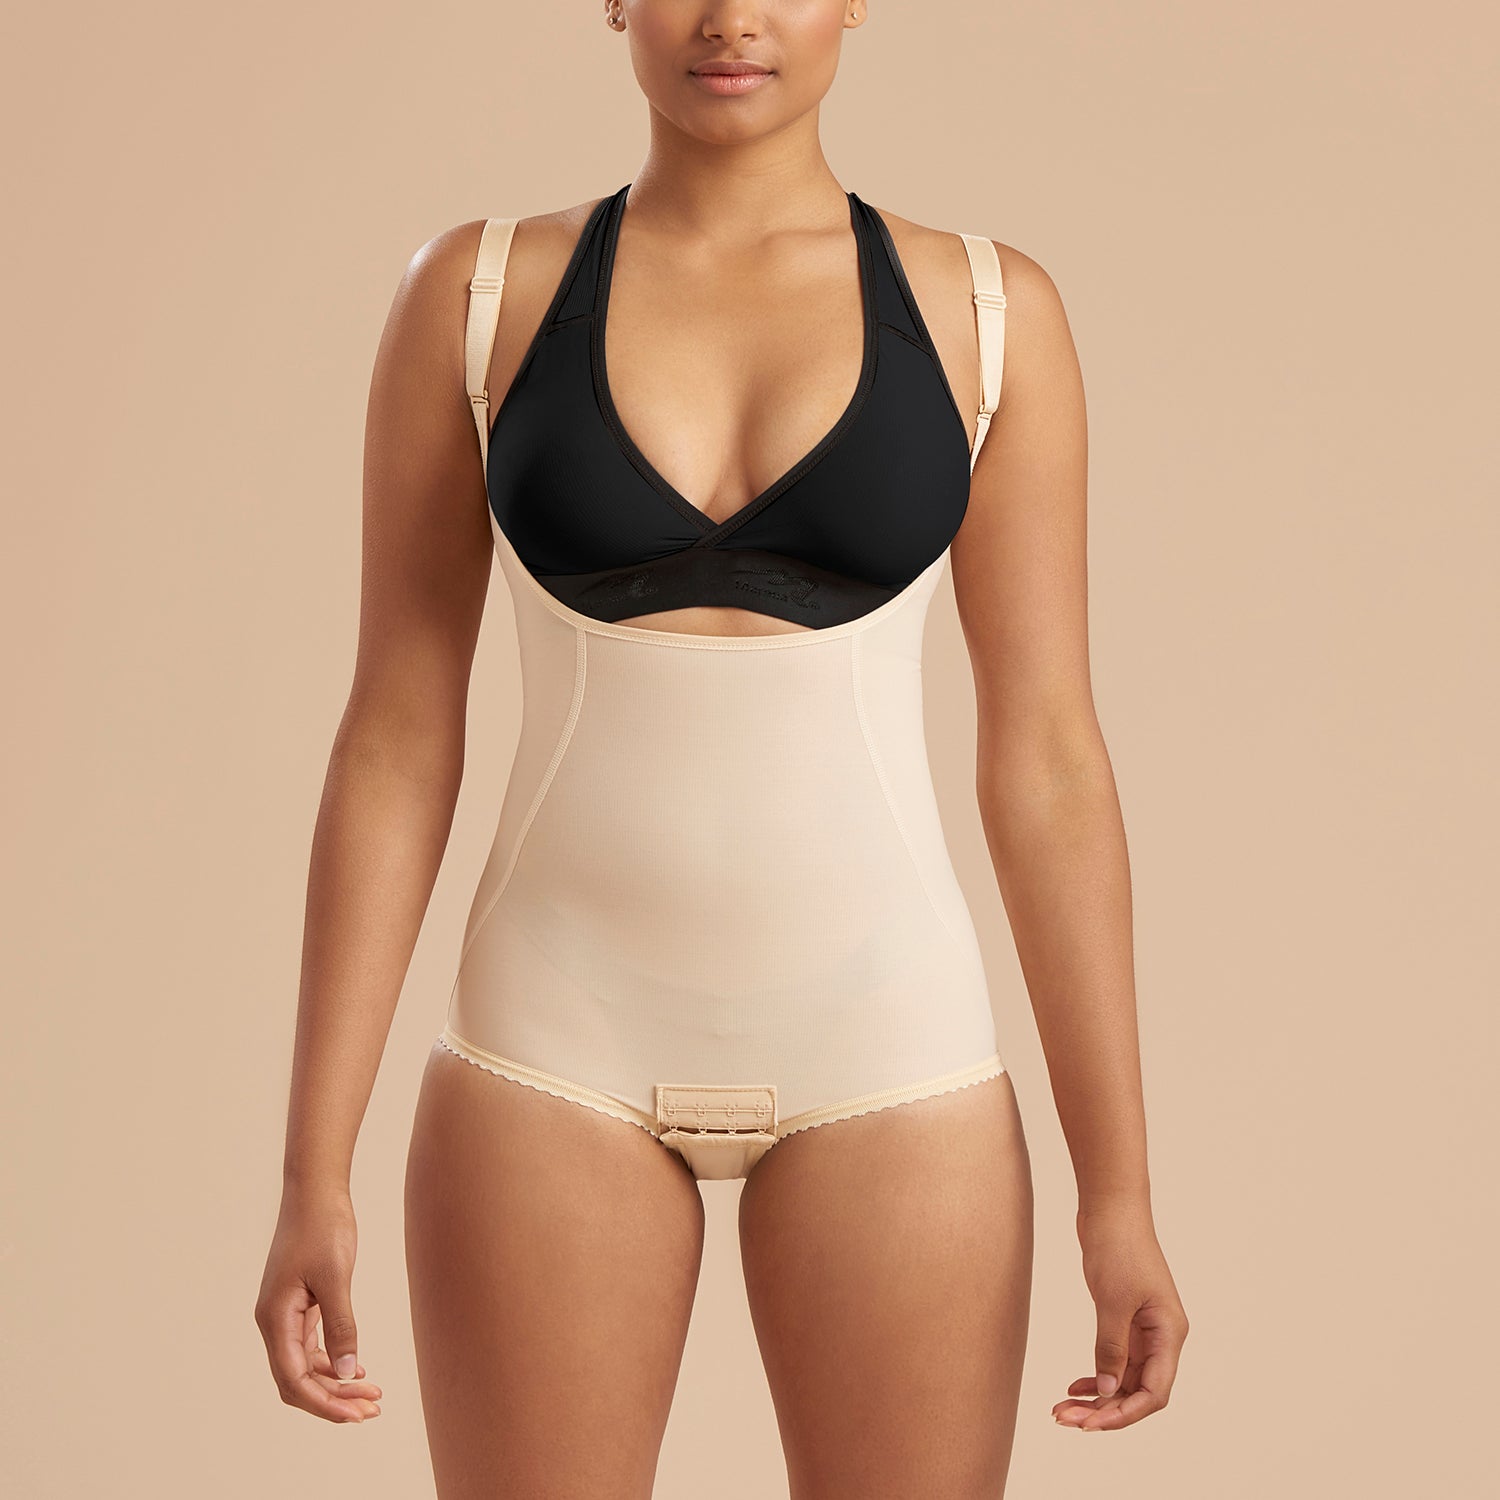 Compression Garments for Plastic Surgery Recovery Step 2 - The